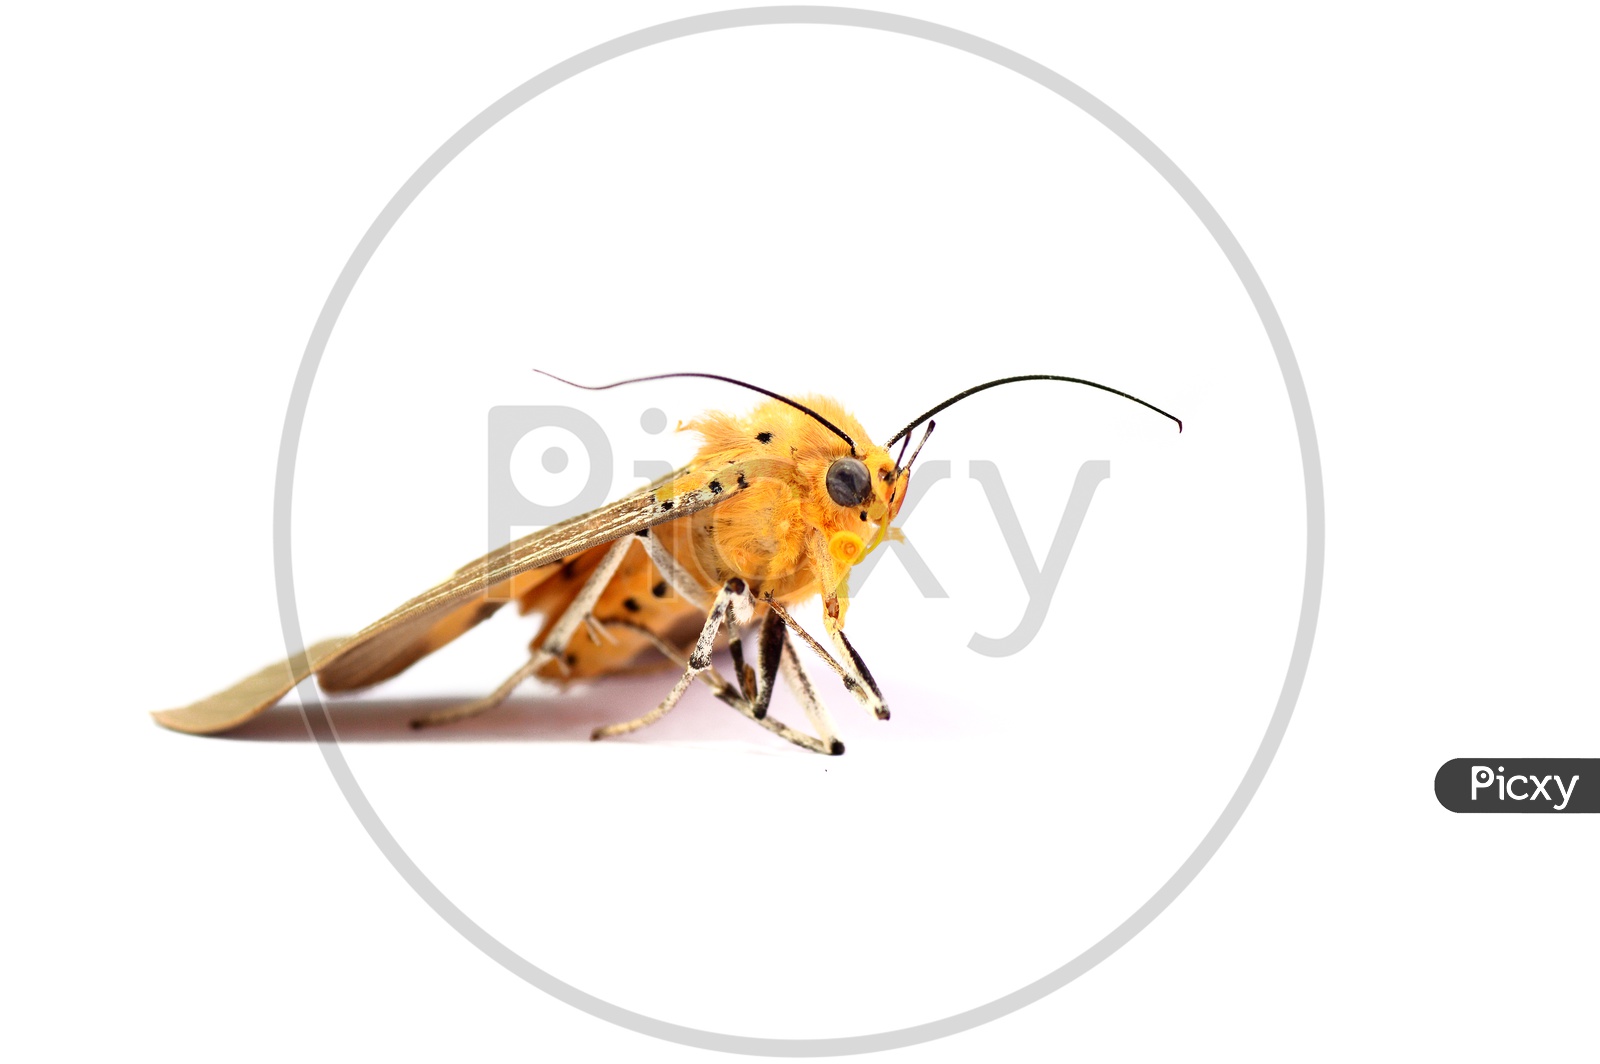 A moth on White Background